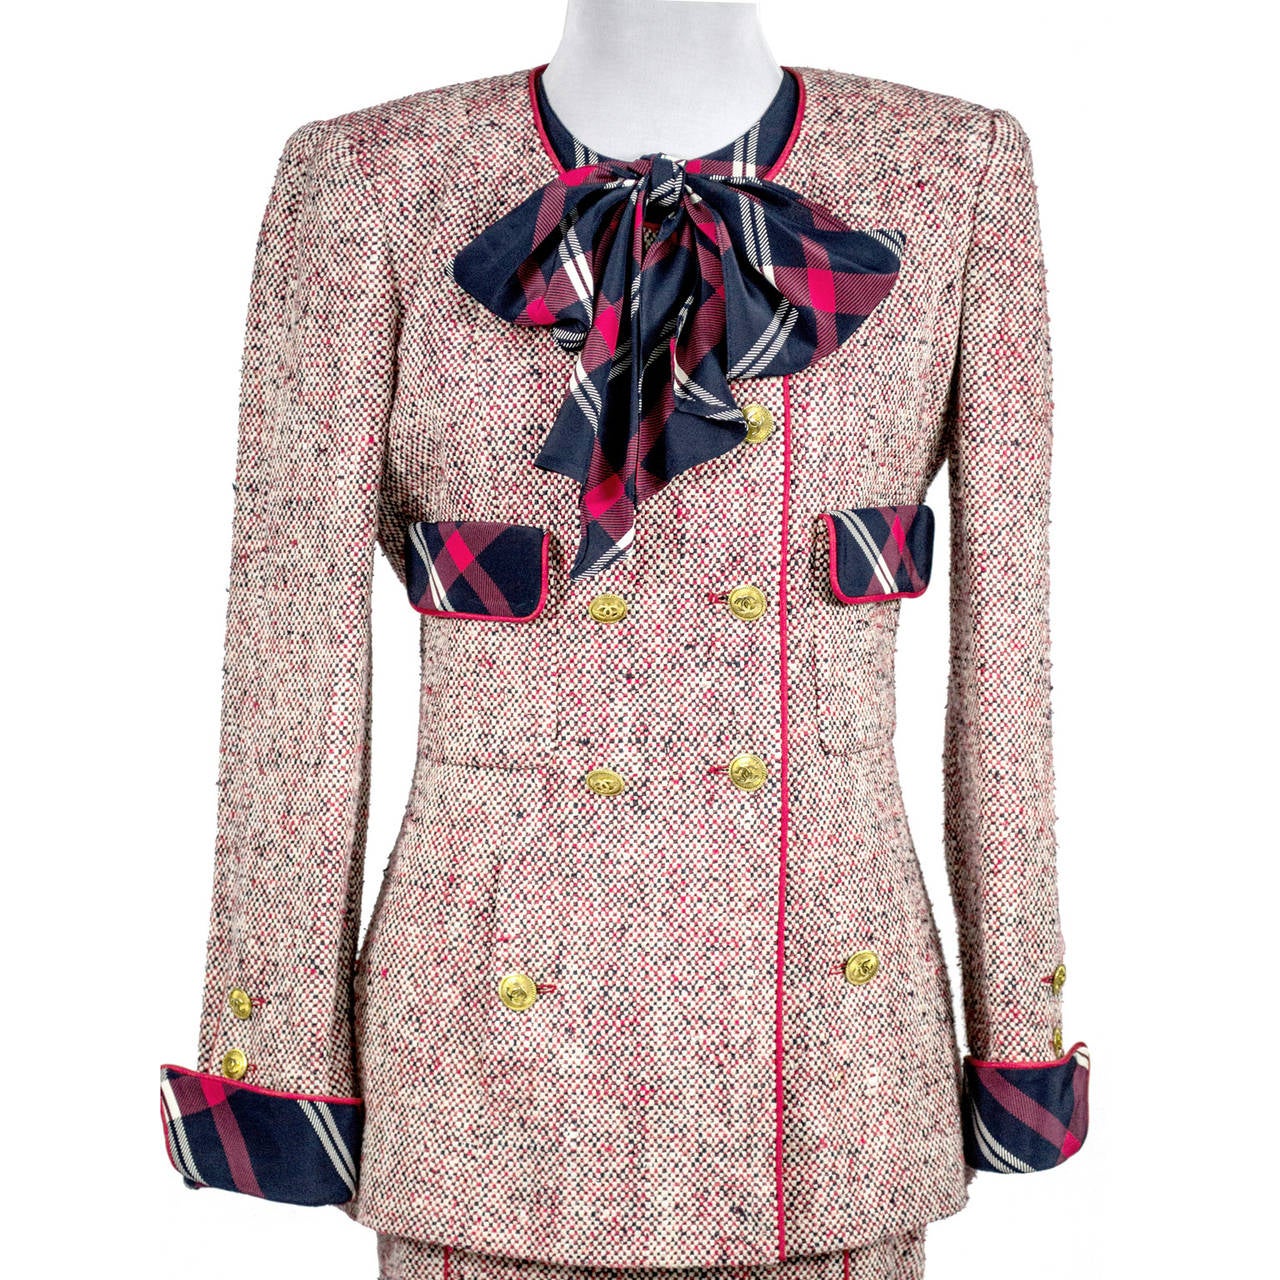 1985 Chanel Runway Tweed With Skirt Blazer & Silk Blouse Red White & Blue  Plaid